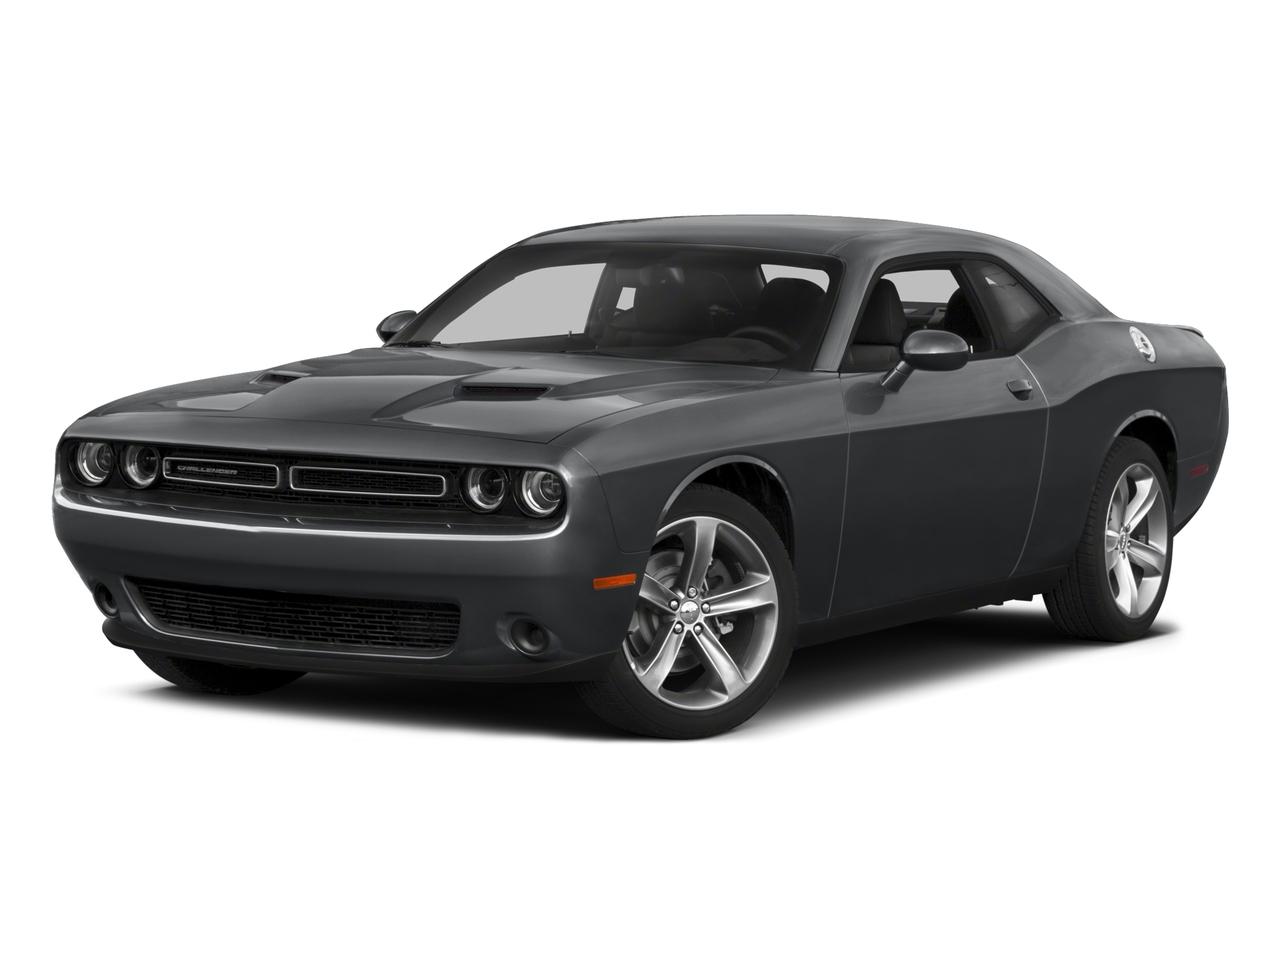 2015 Dodge Challenger Vehicle Photo in BORGER, TX 79007-4420